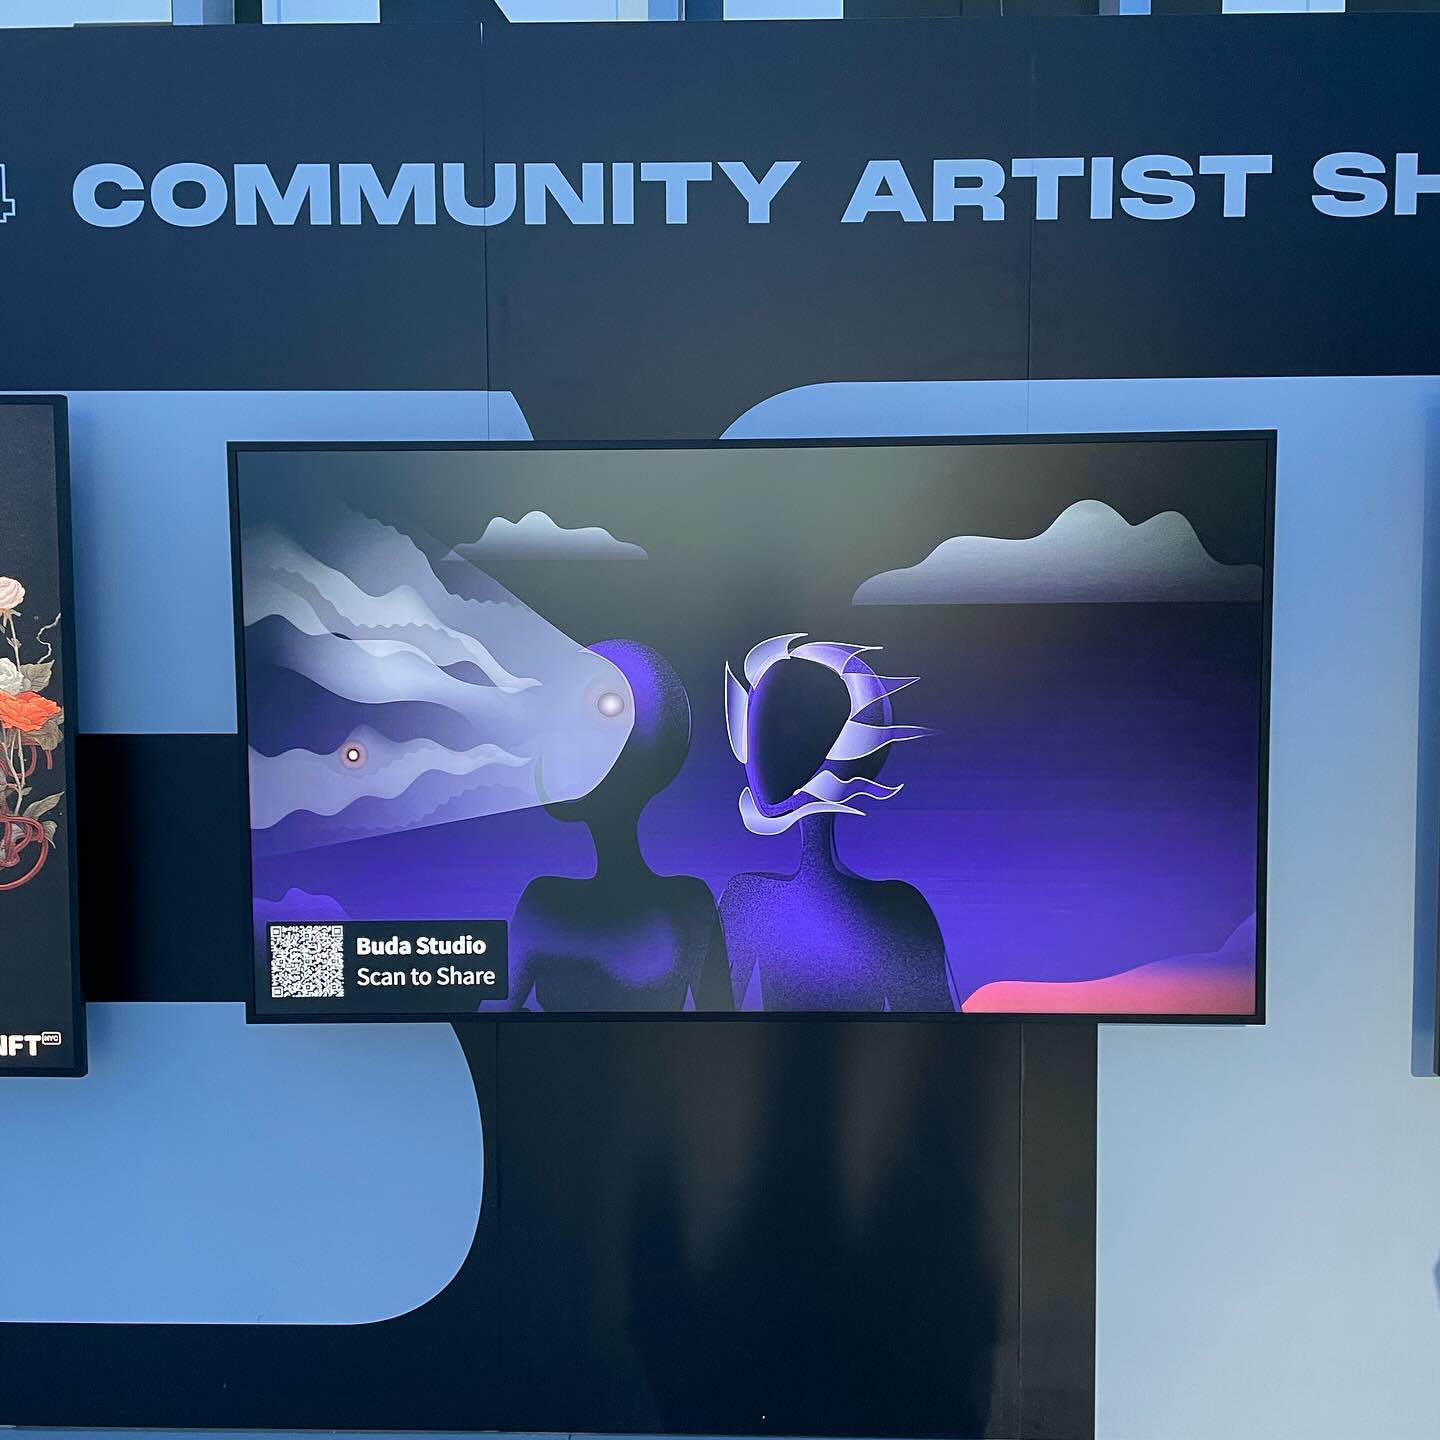 My piece “the Essence of Climax” was displayed at #nftnyc2024 !! It looked amazing & is still available to collect🌀! Also great to see @budastudio_art animated piece there!